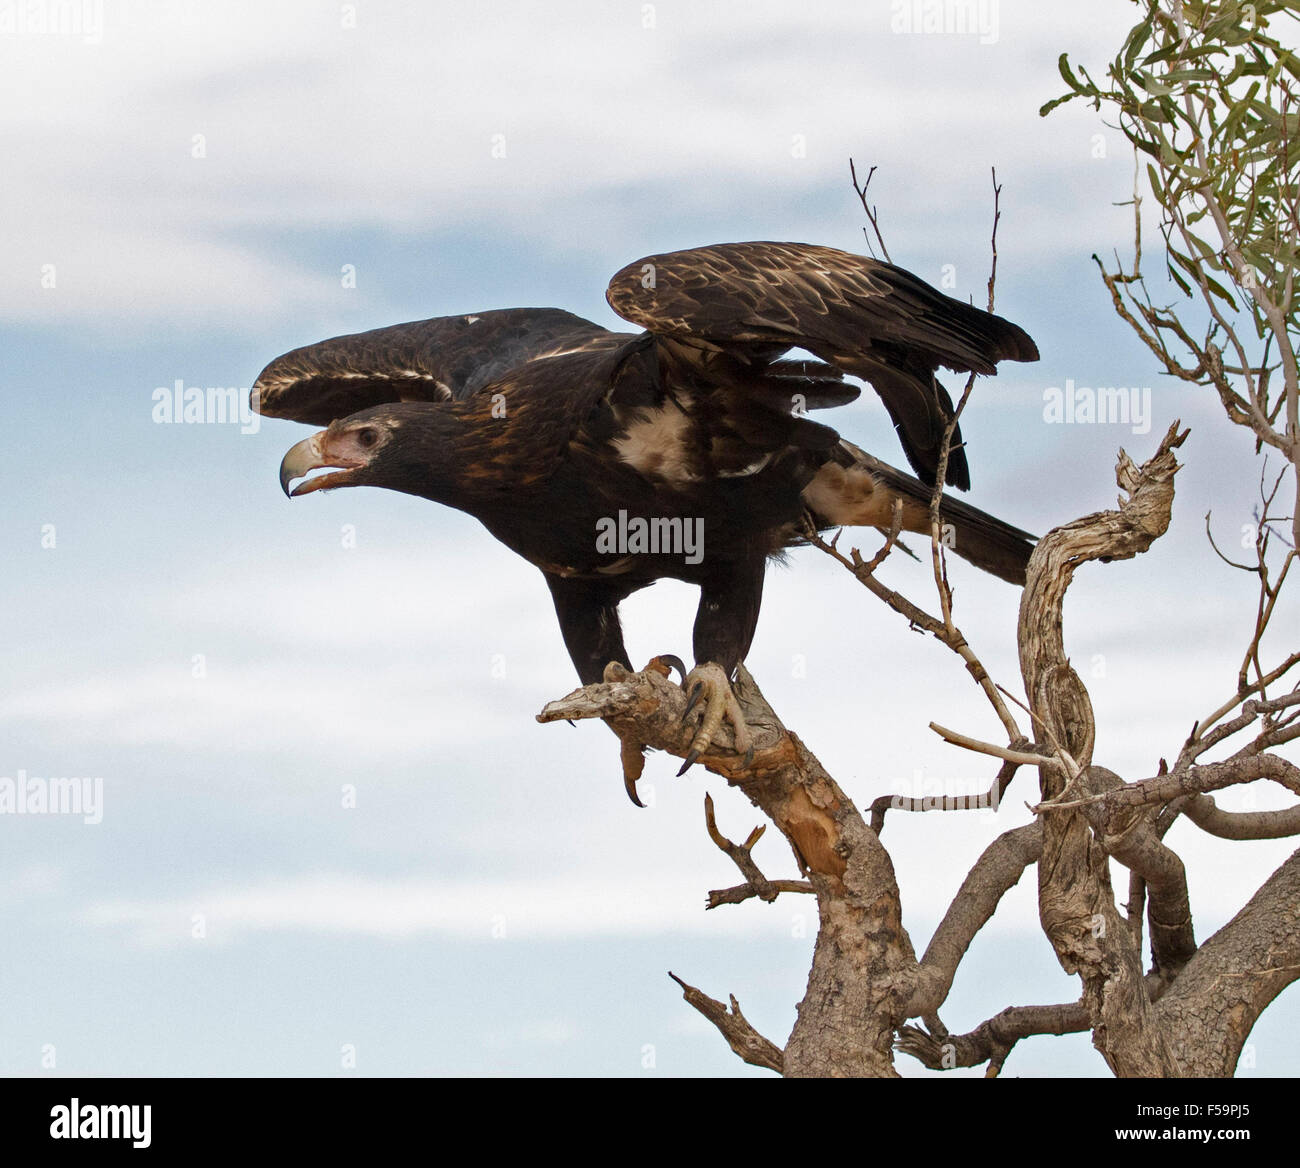 Wedge-tailed eagle, Aguila audax, about to launch into flight from dead tree with wings raised against blue sky in outback Australia Stock Photo